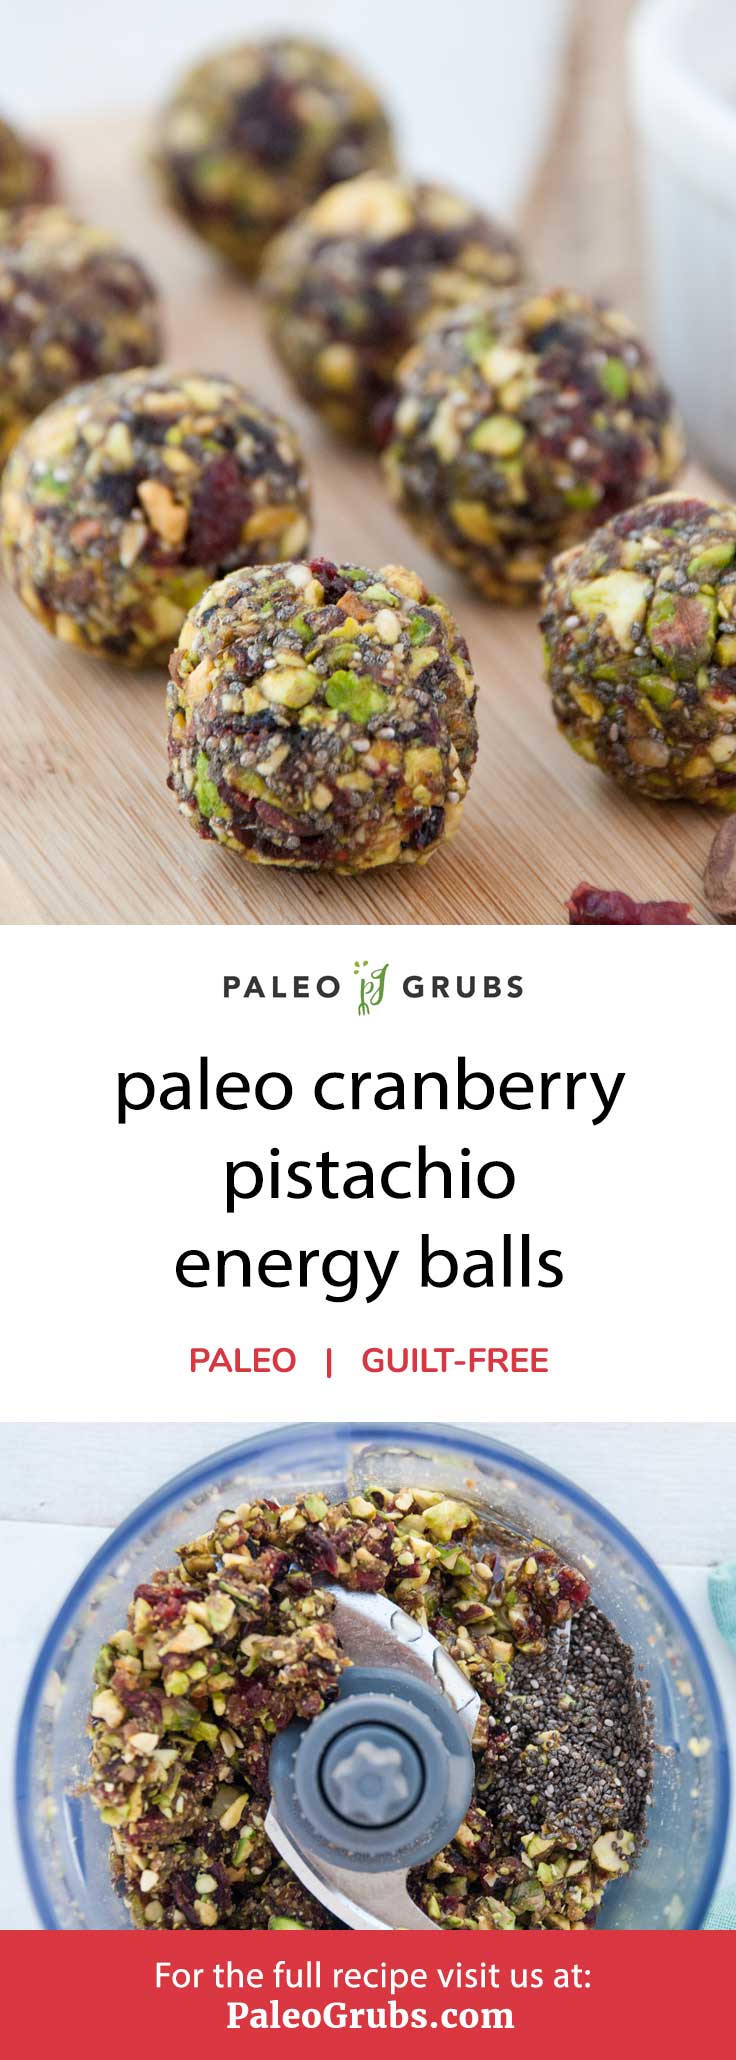 These nutty and sweet paleo cranberry pistachio energy balls make the perfect high energy snack or healthy dessert.